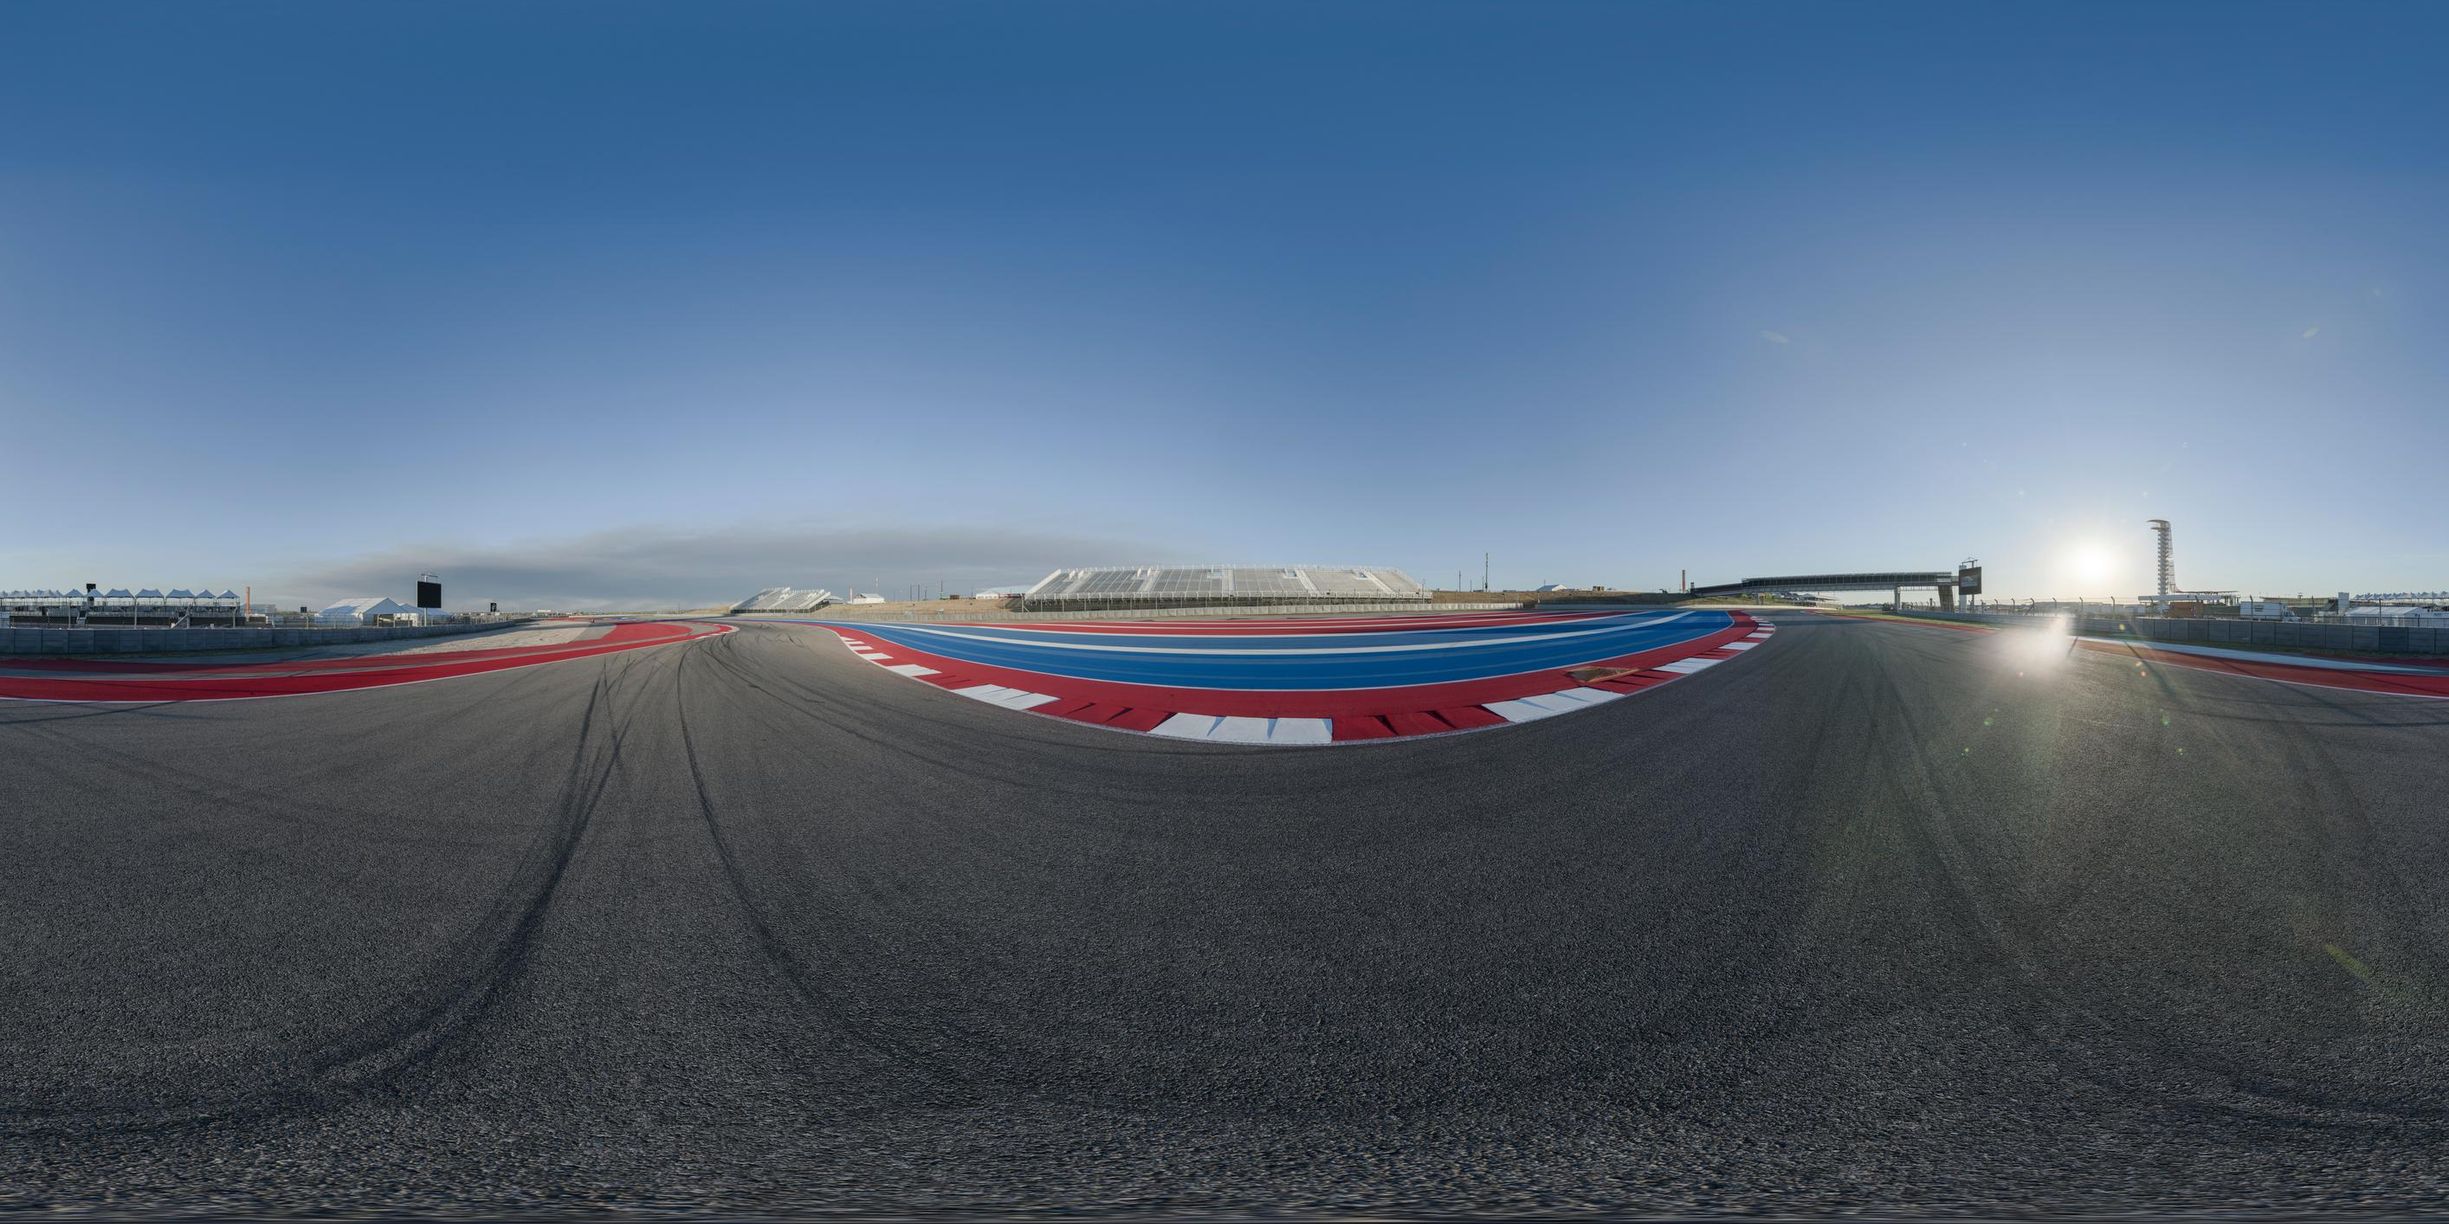 this is a 360 - view shot of a race track, from behind, as it stretches out into the distance